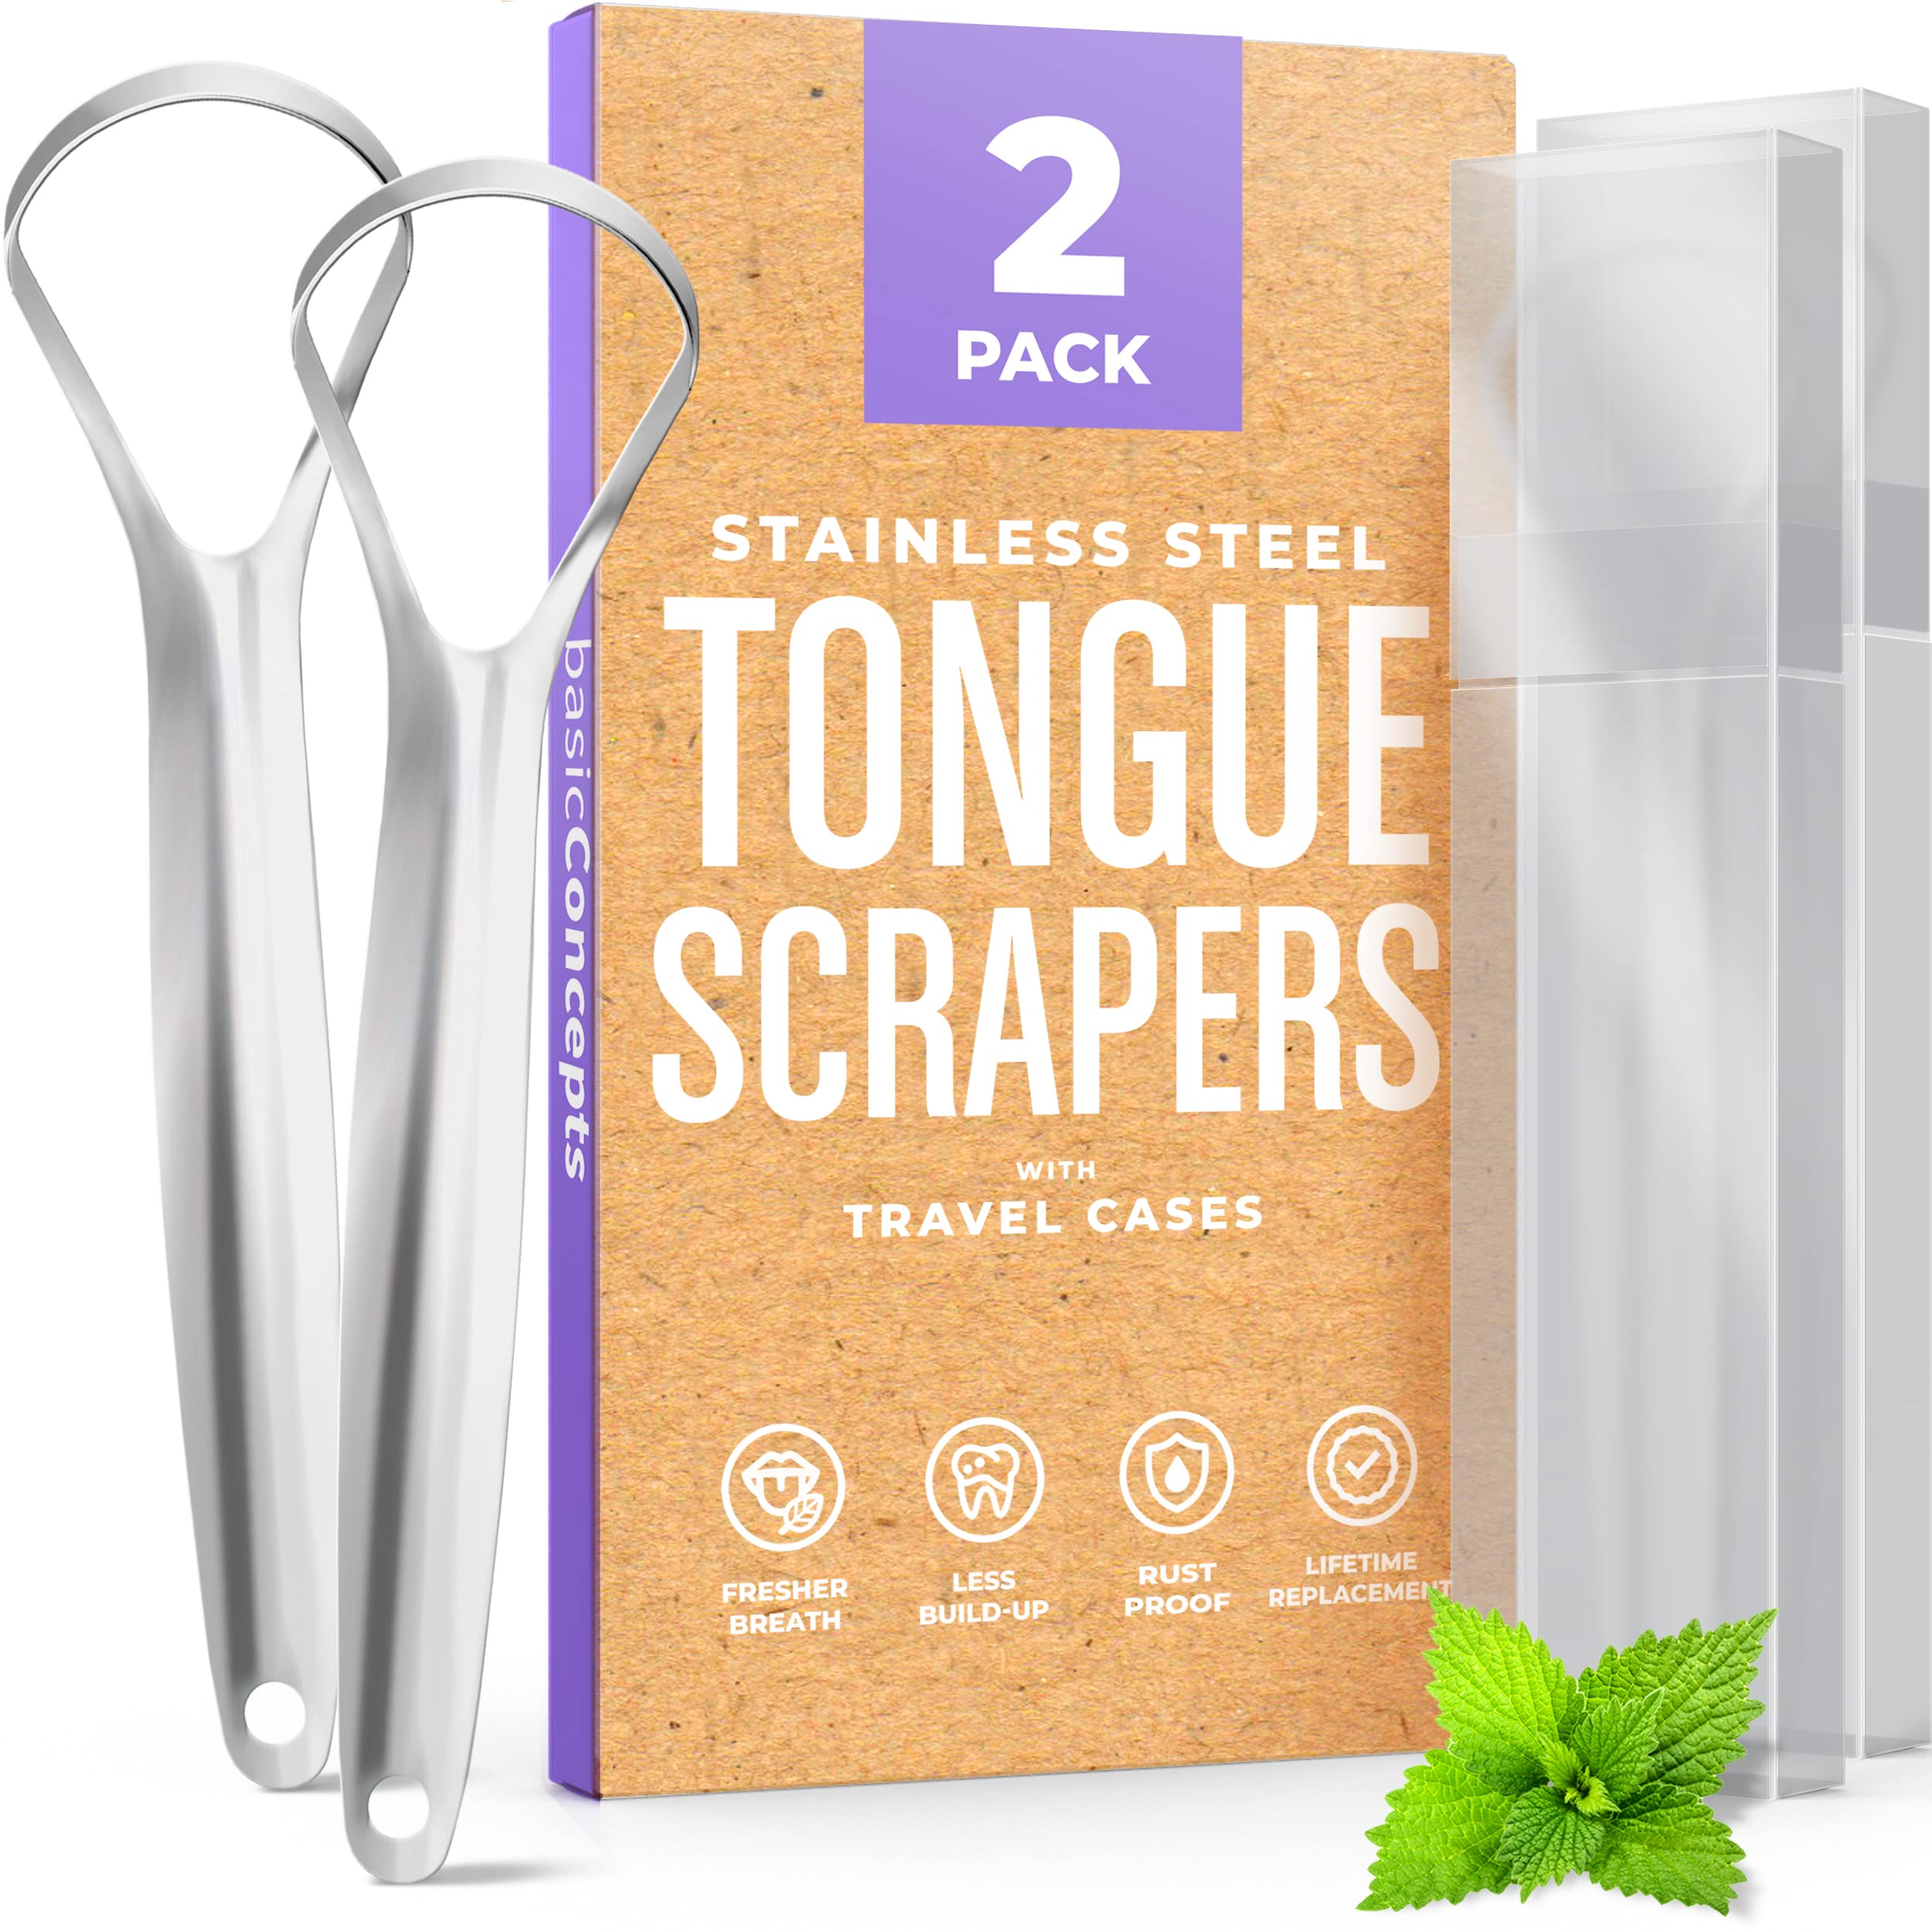 BASIC CONCEPTS Tongue Scraper for Adults (2 Pack), Reduce Bad Breath (Travel Cases Included), Stainless Steel Tongue Cleaners, 100% Metal Tongue Scraper with Case Fresh Breath Tongue Cleaner Oral